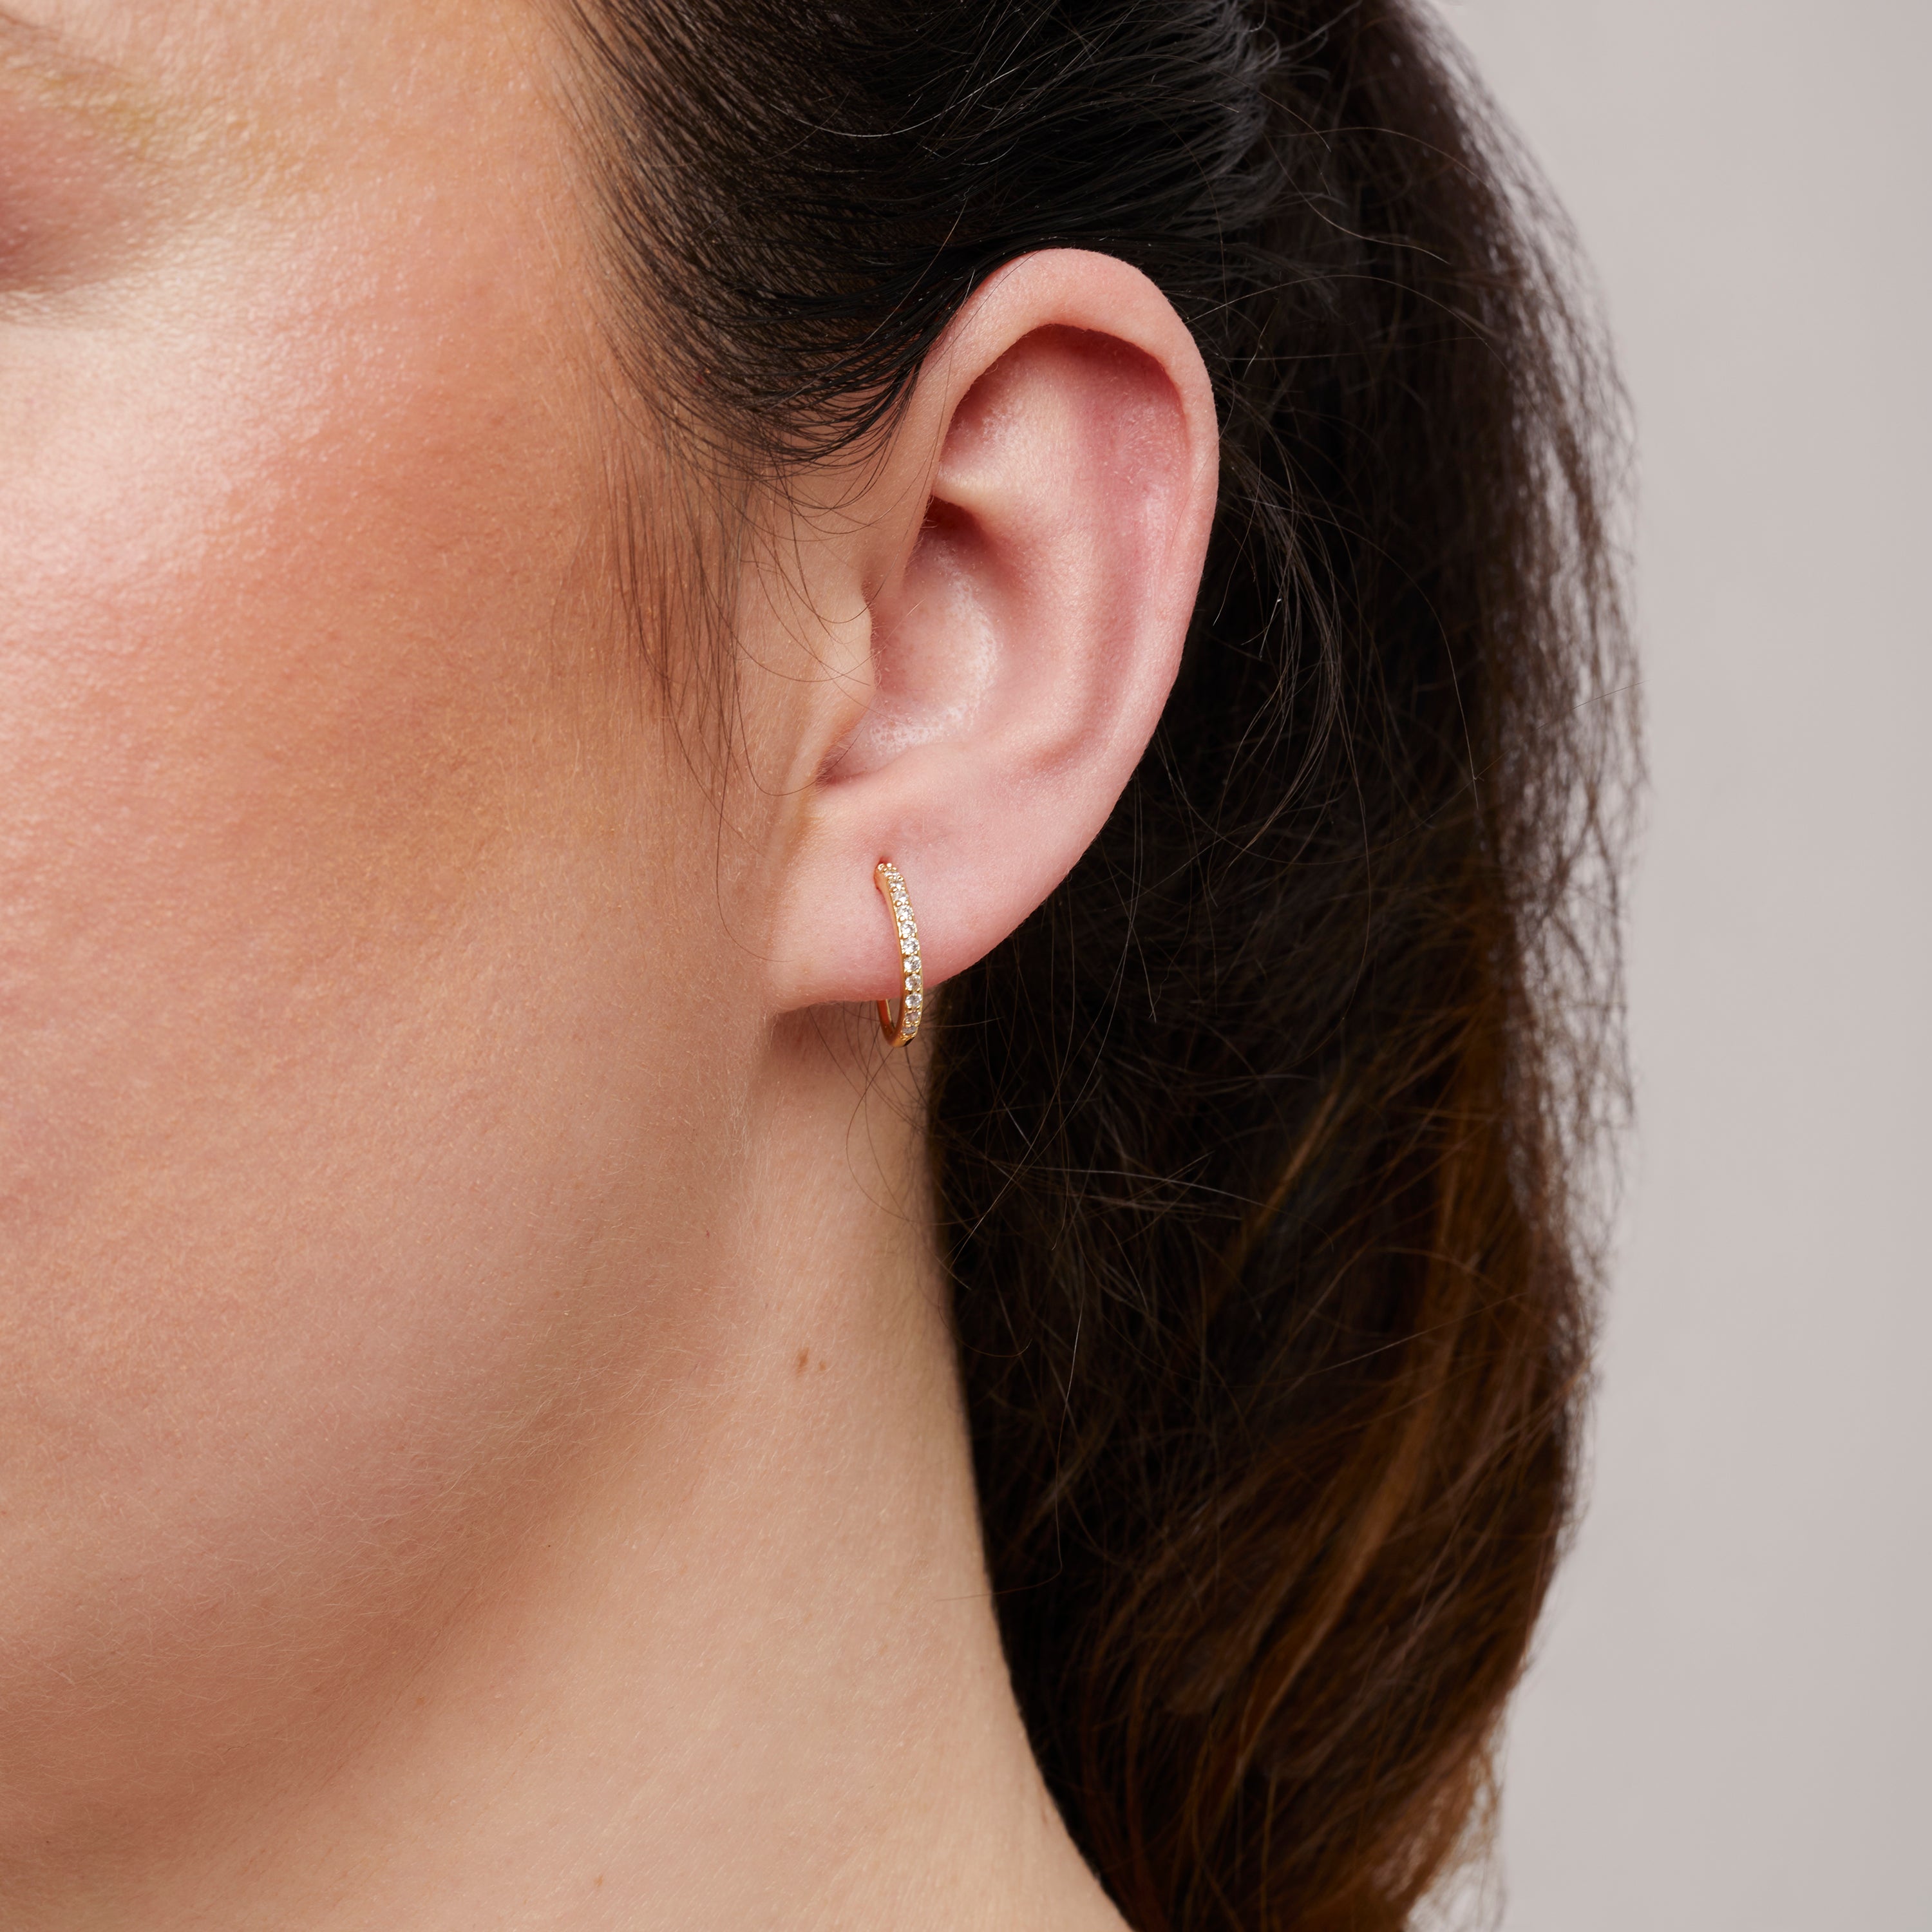 A model wearing the Medium Pavé Hoop Clip On Earrings in Gold offer a Mosquito Coil Clip-On Closure, making them ideal for Thick/Large Ears, Sensitive Ears, Small/Thin Ears, Stretched/Healing Ears, and Keloid Prone Ears. They provide an average comfortable wear duration of 24 hours with a medium secure hold, and can be gently adjusted by squeezing the padding forward once on the ear. Please note that this item is only one pair.